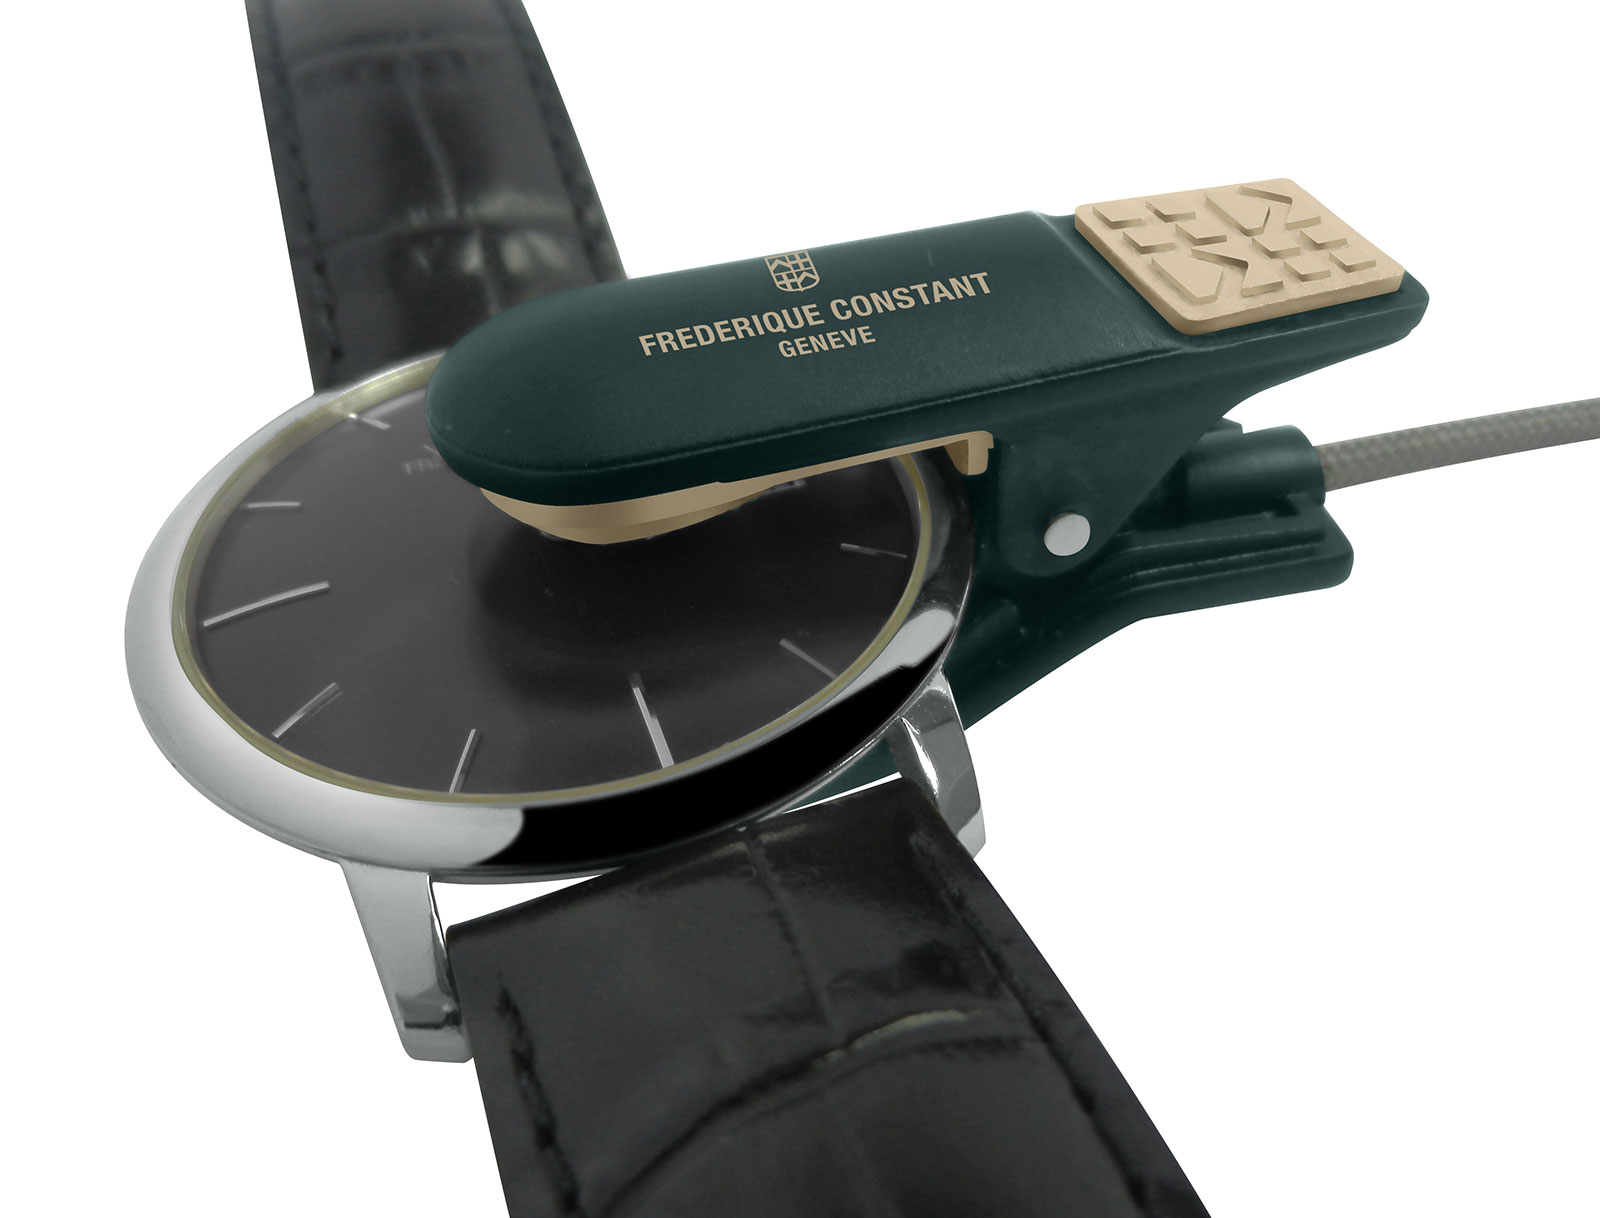 Frederique Constant Analytics watch timing device 2